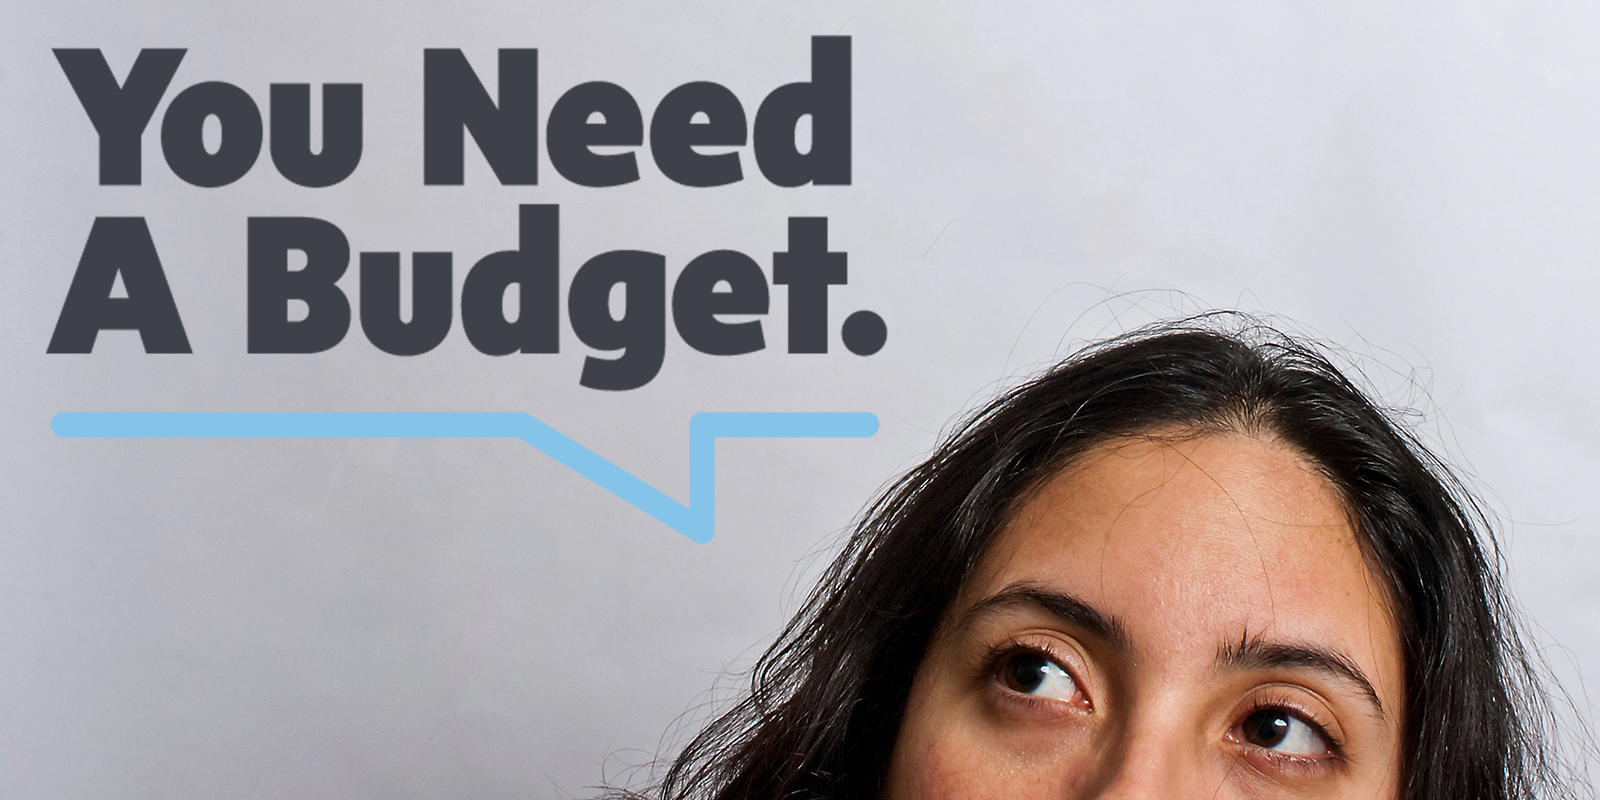 Featured Image You Need A Budget could change your life